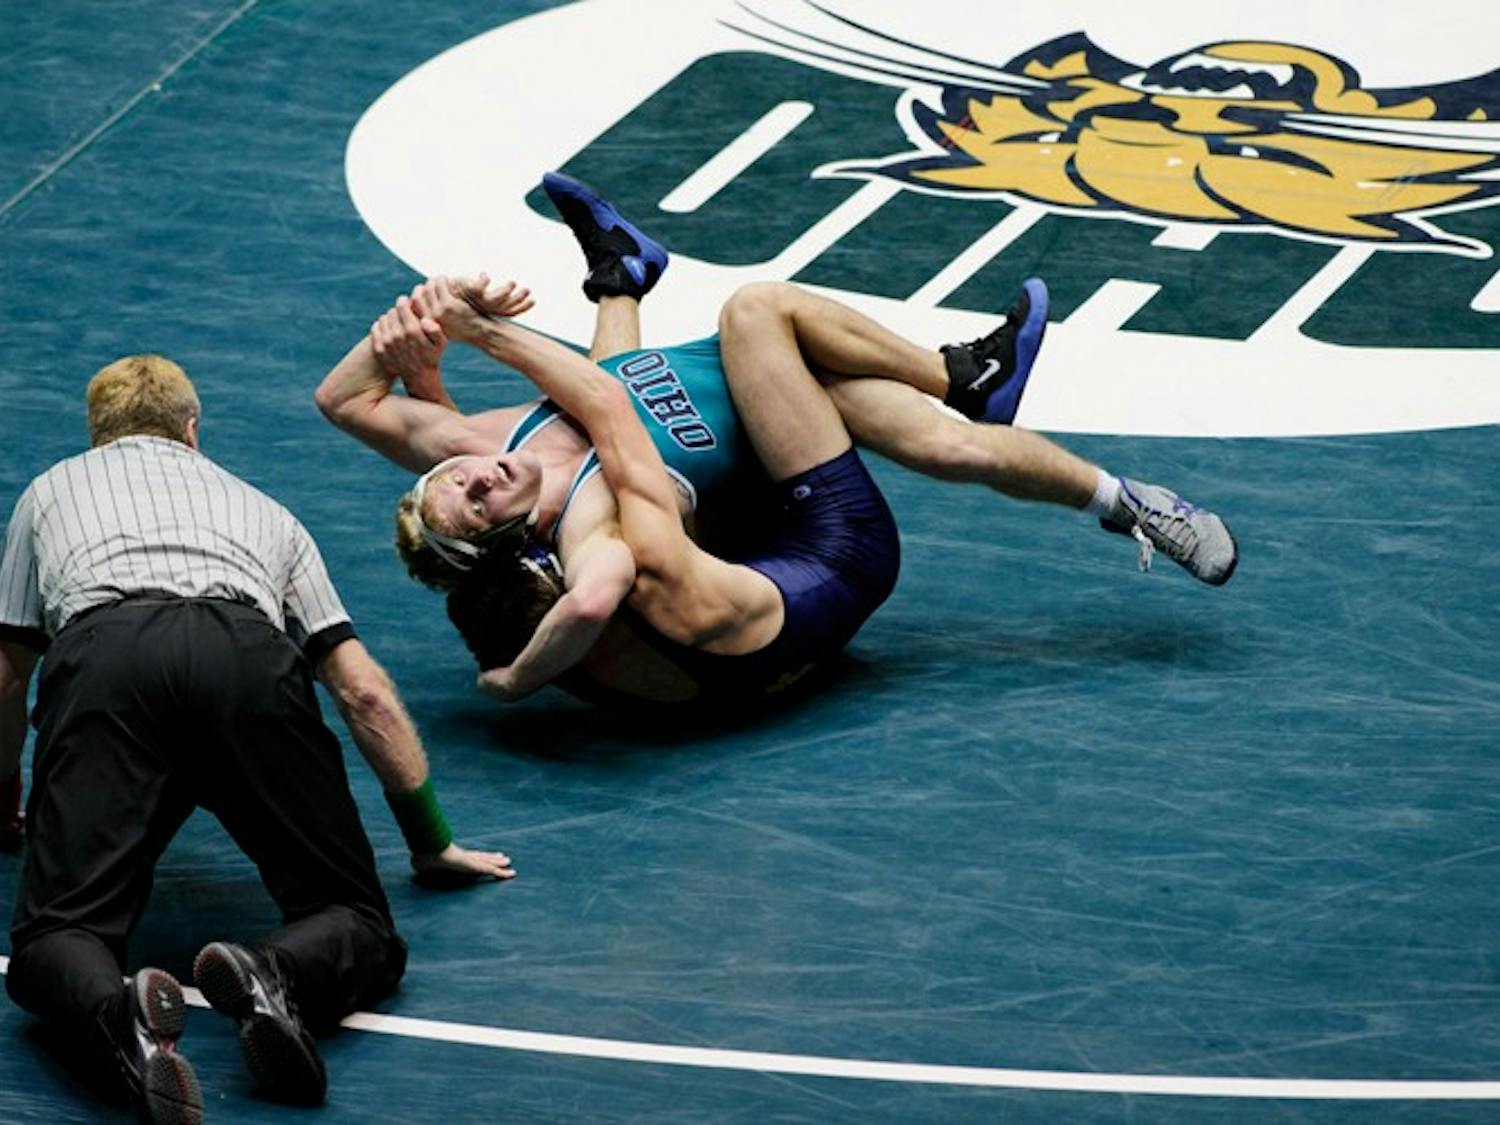 Wrestling: Bobcats crumble to Mountaineers in season's worst loss  